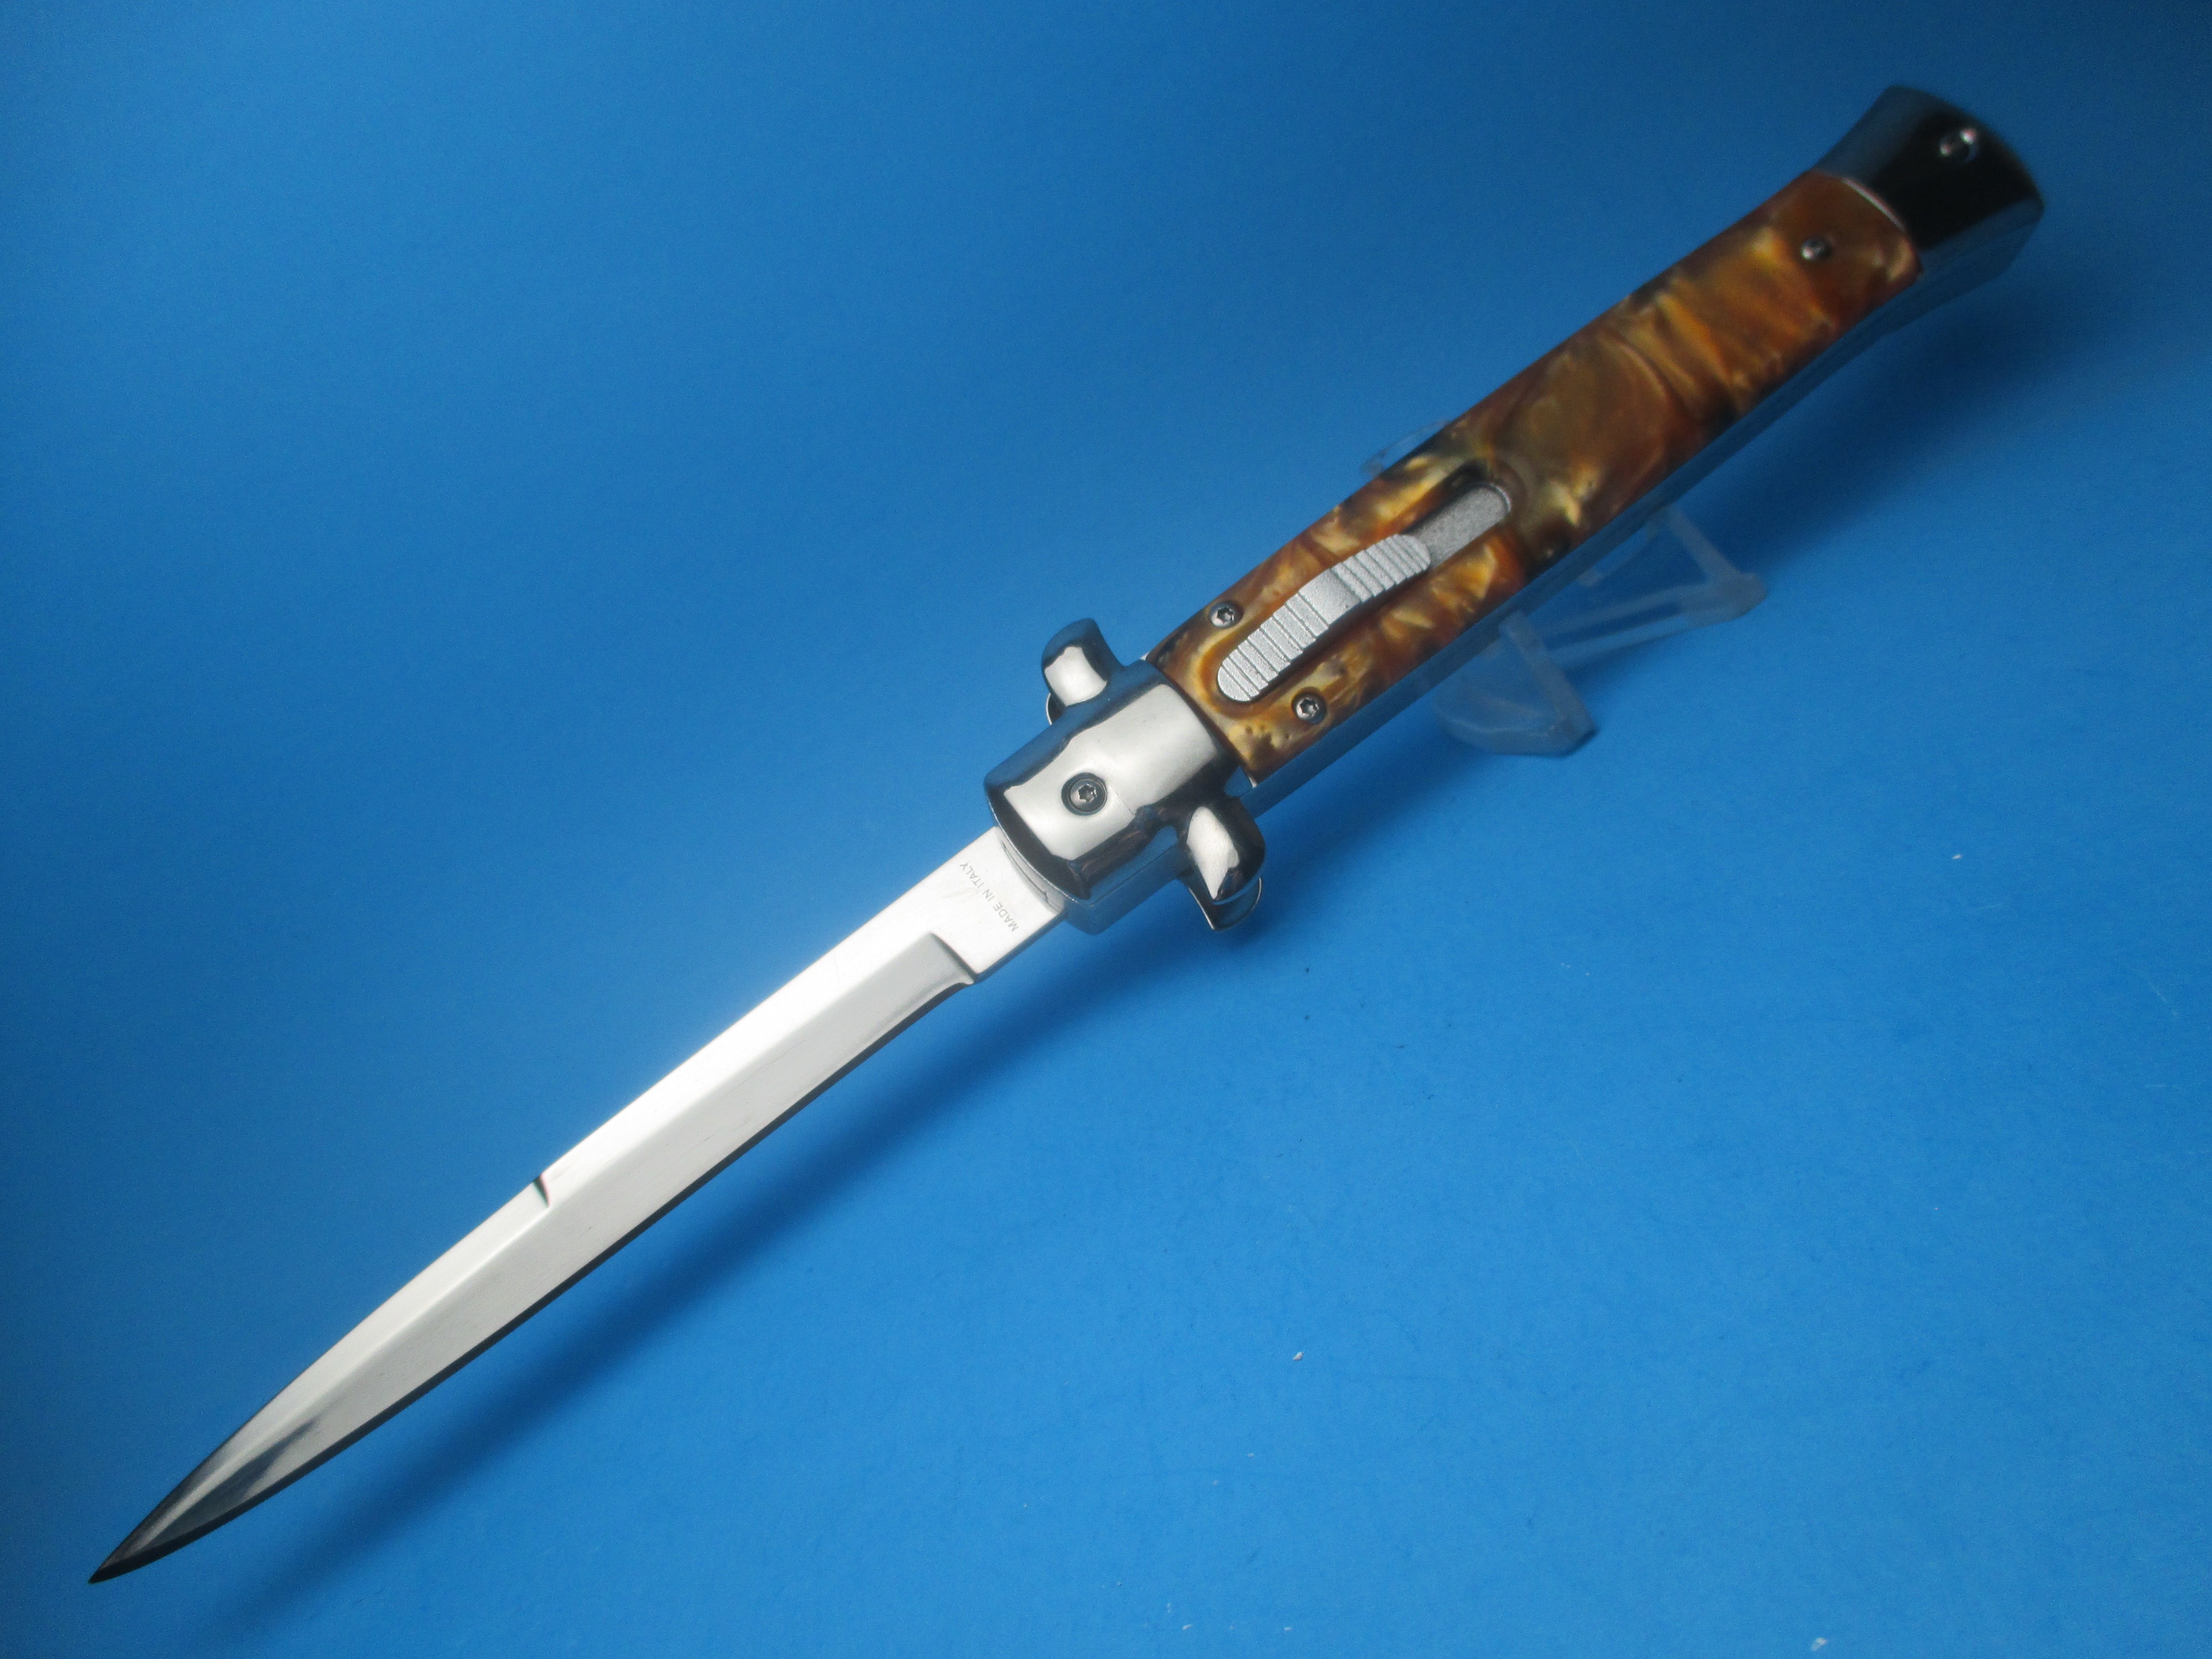 At MySwitchblade.com we carry a wide variety of switchblades from many places around the globe including: The U.S, Russia, Czechoslovakia, along with Asian Imports. We also offer custom high-end “knife art” switchblades from makers like Reese Weiland, Jeff Harkins, Bill Saindon, Paul (Burn) Panak and many more. Apart from imports and custom build switchblades, if you are looking for something more, please ask us and we may have them in stock for you.